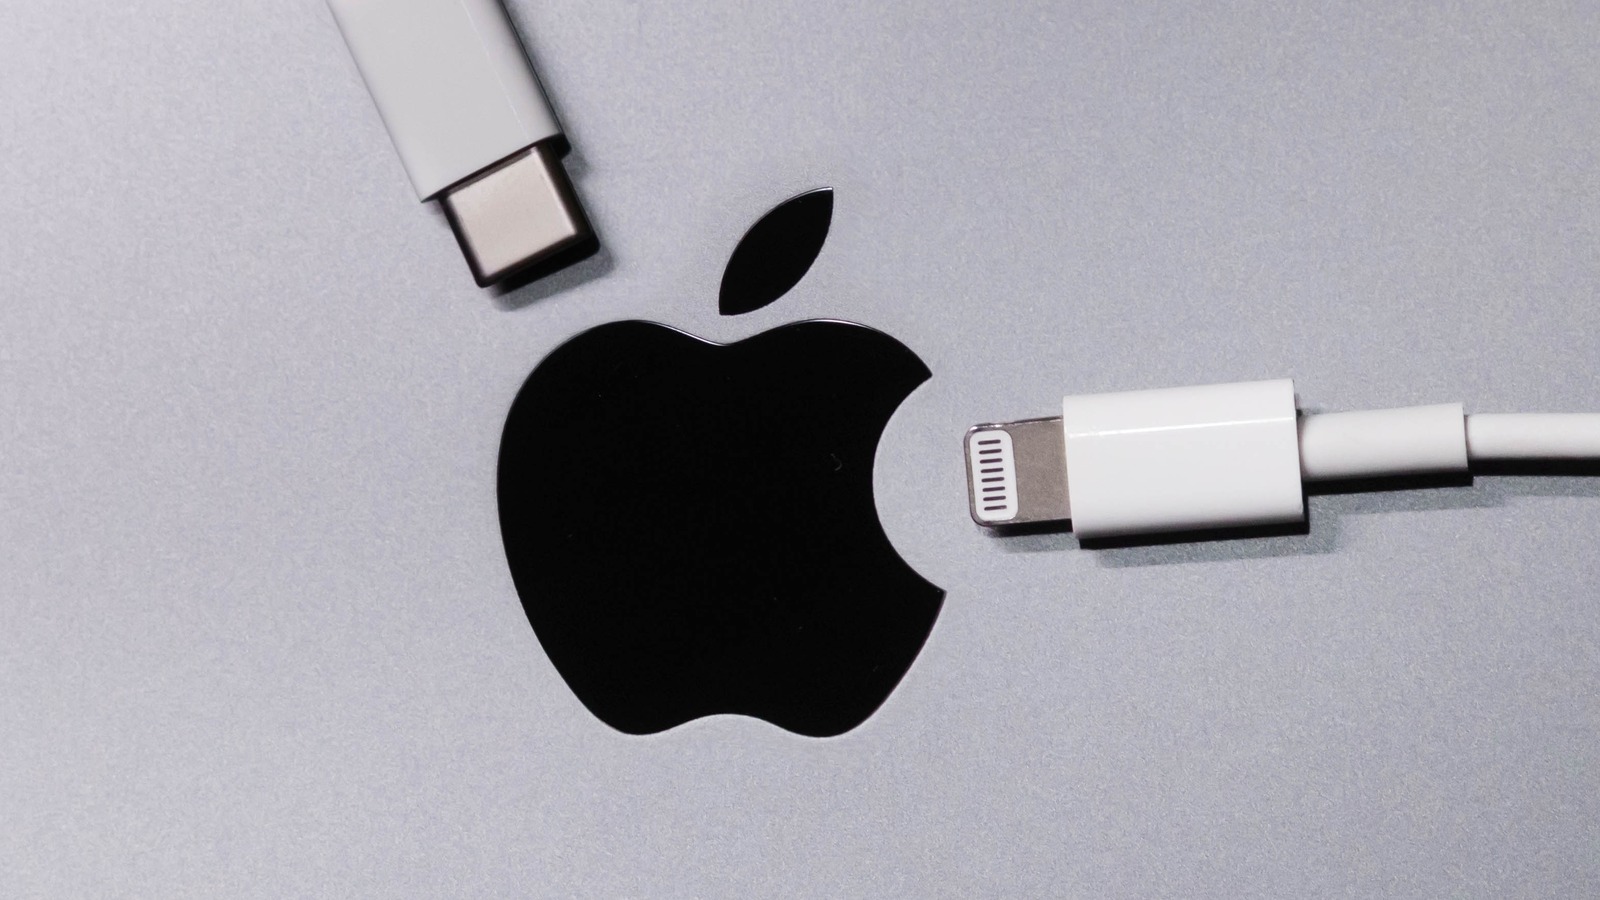 Apple Reportedly Testing USB-C iPhones, Which May Signal The End Of The Lightning Port